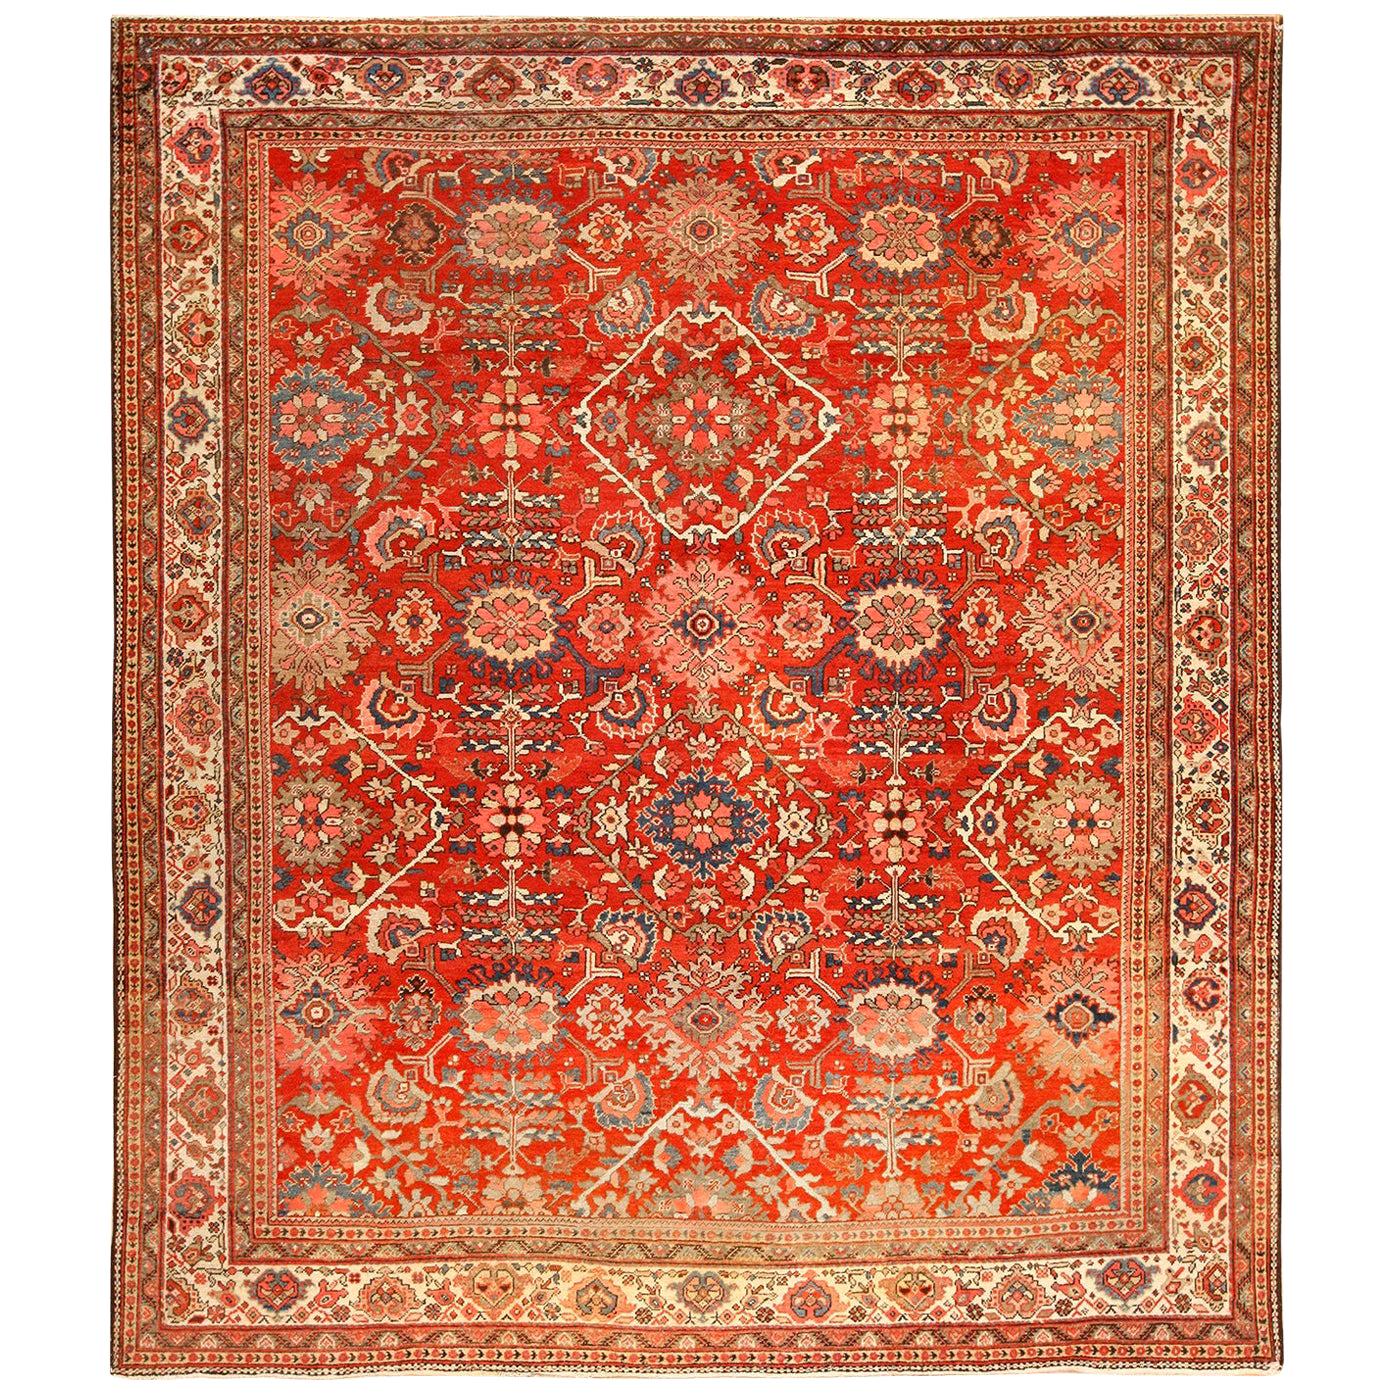 Antique Persian Sultanabad Rug. Size: 8 ft 7 in x 9 ft 10 in